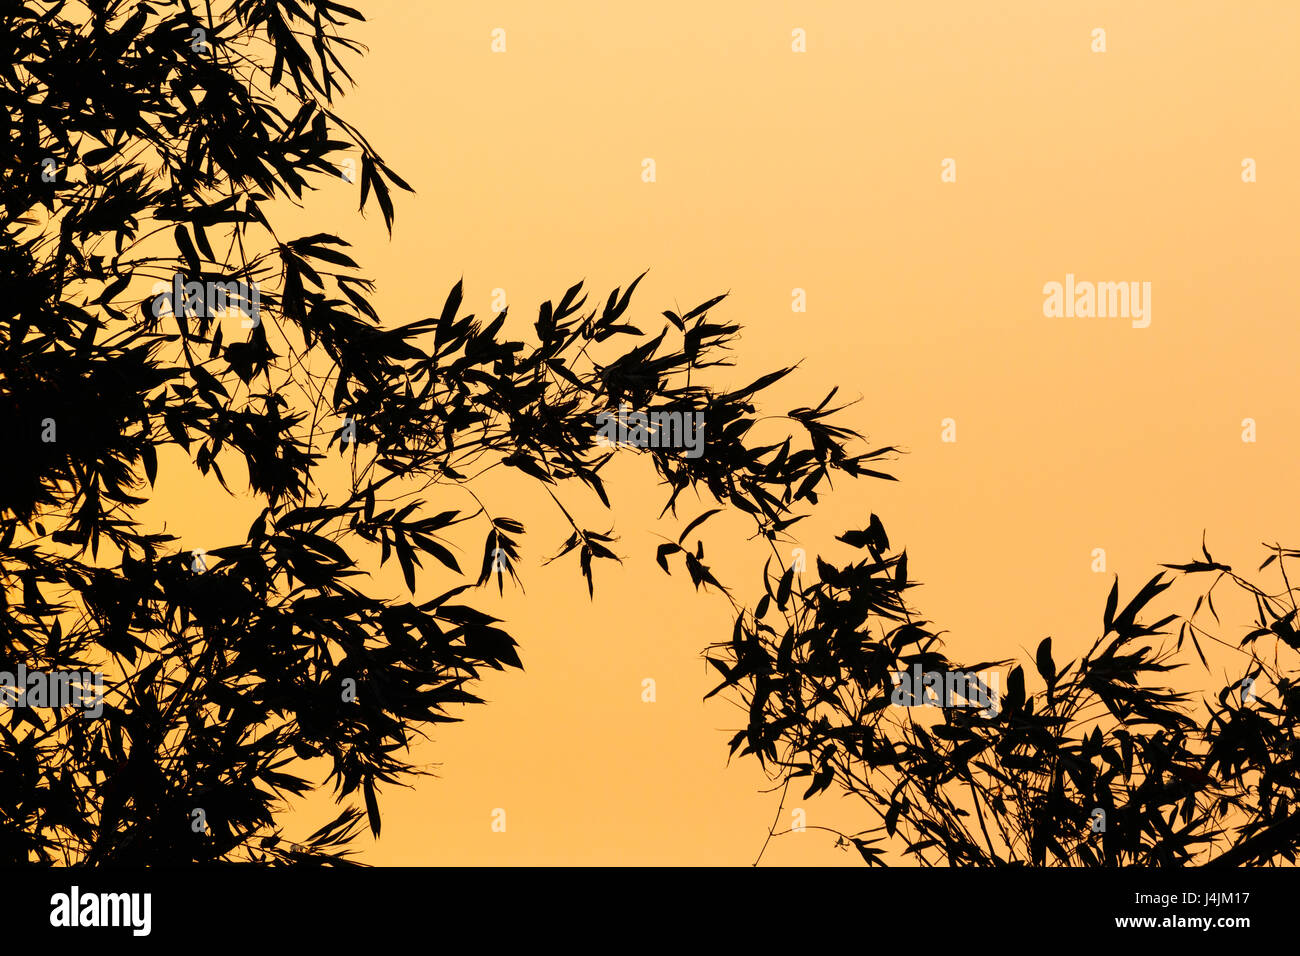 Asian silhouette of bamboo plants against a warm orange background at sunset Stock Photo